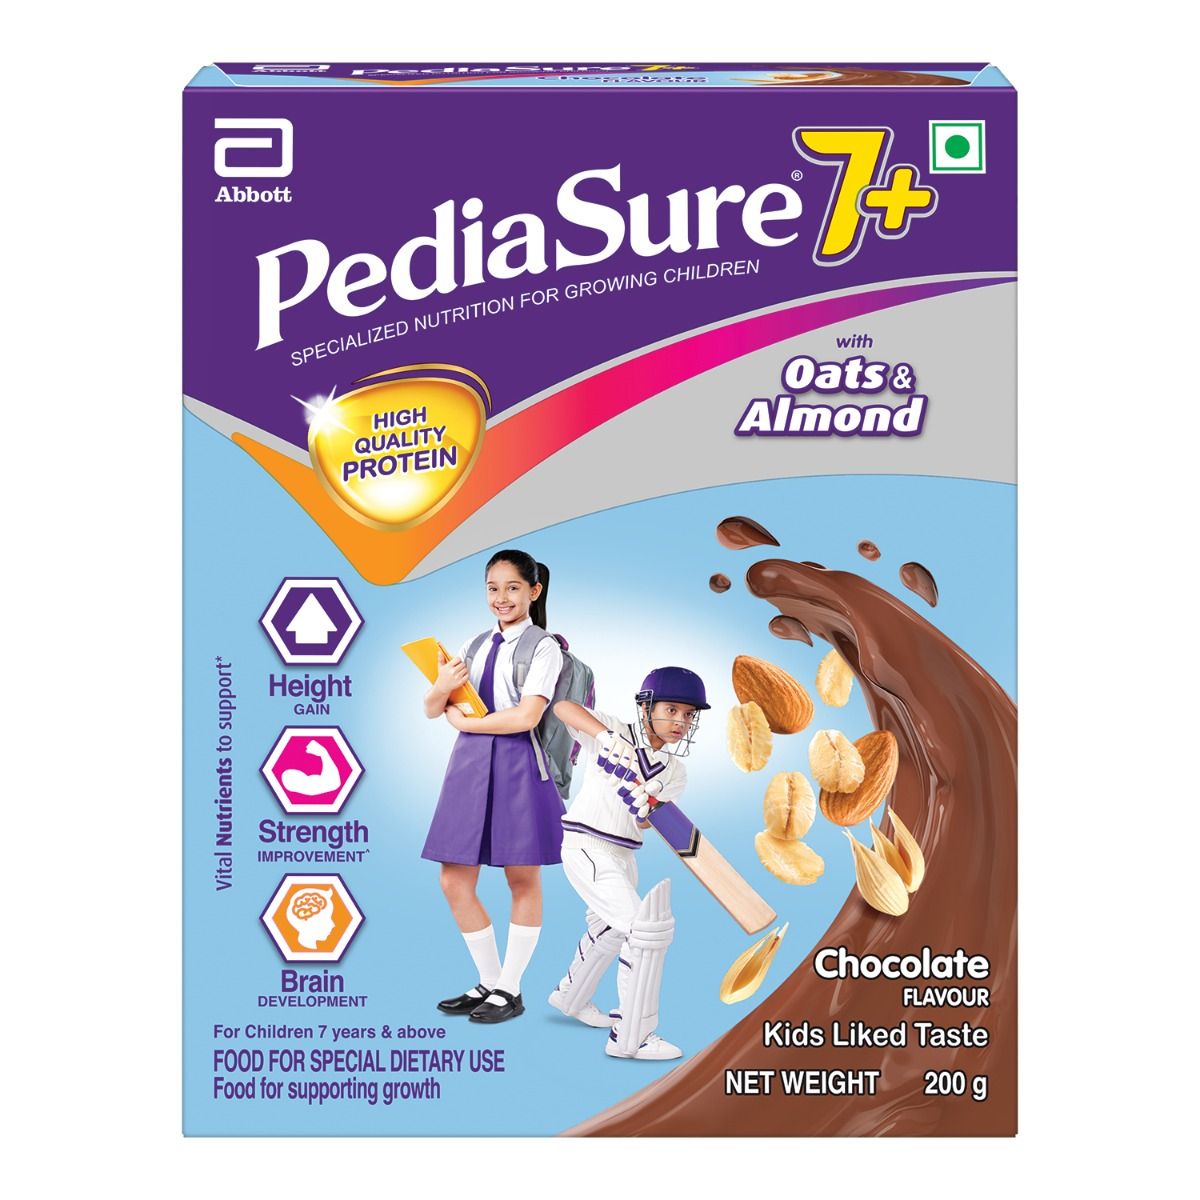 Pediasure Chocolate Flavour Nutrition Drink Powder for 7+ Years Kids, 200 gm Refill Pack, Pack of 1 